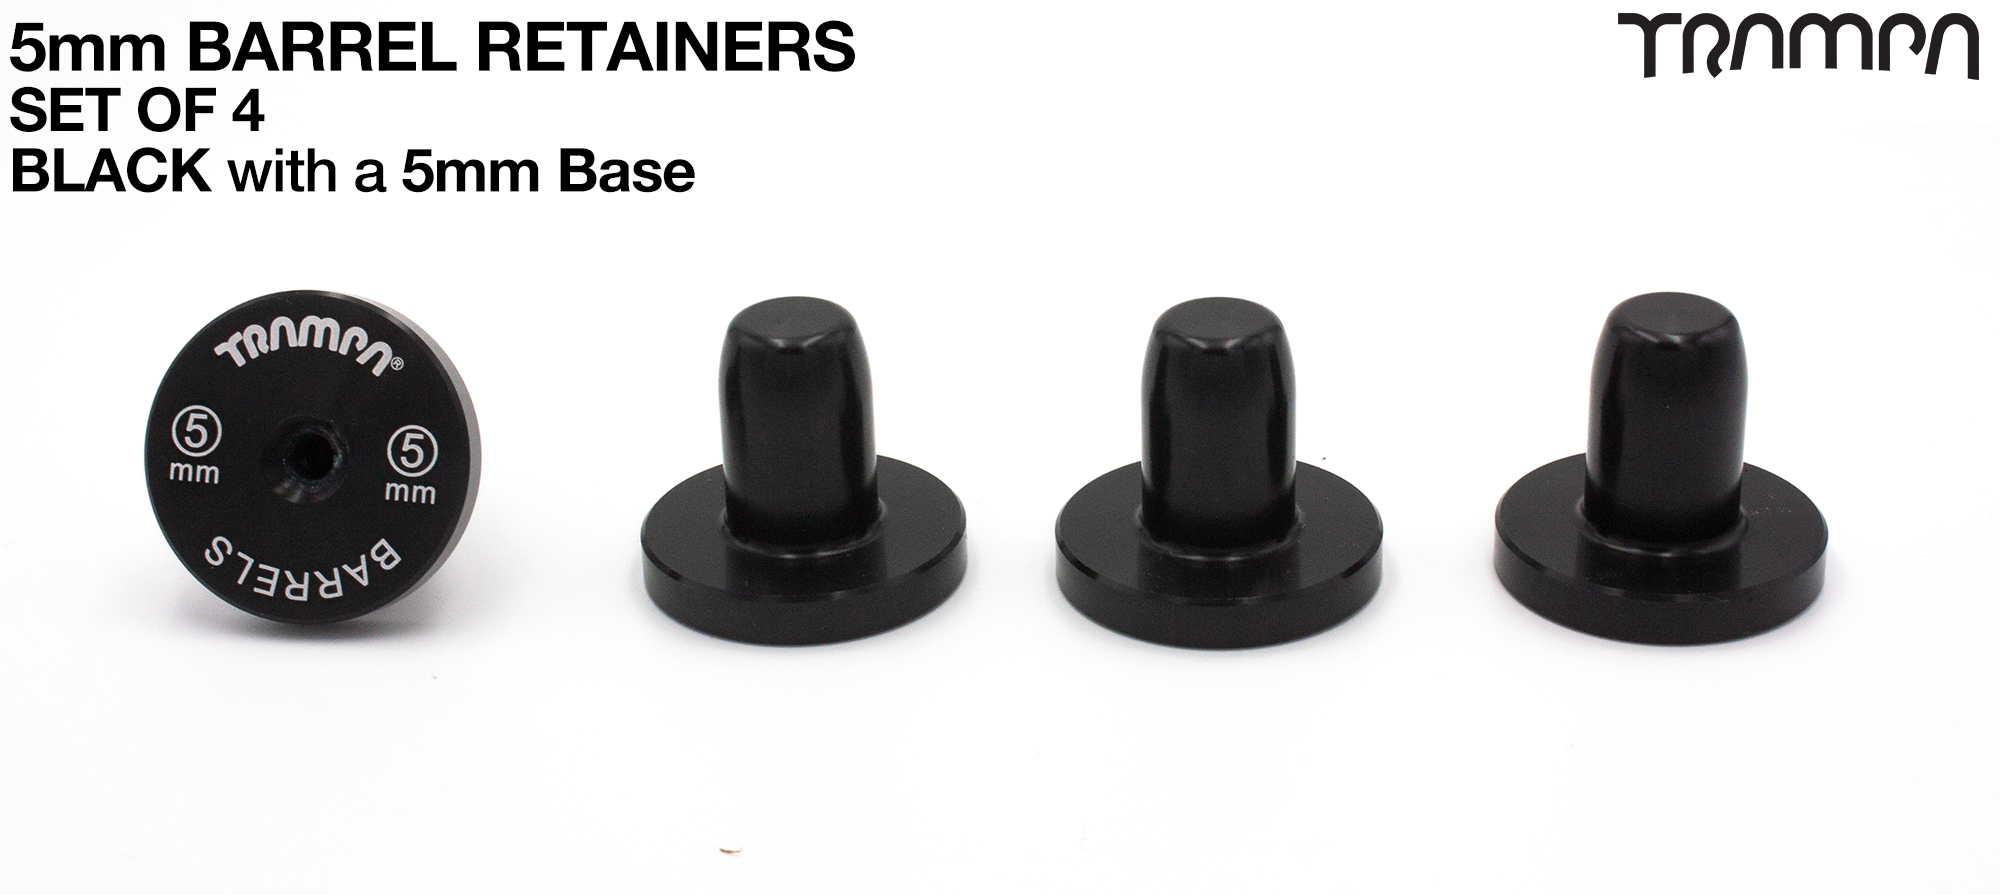 Barrel Retainers x4 with 5mm Base